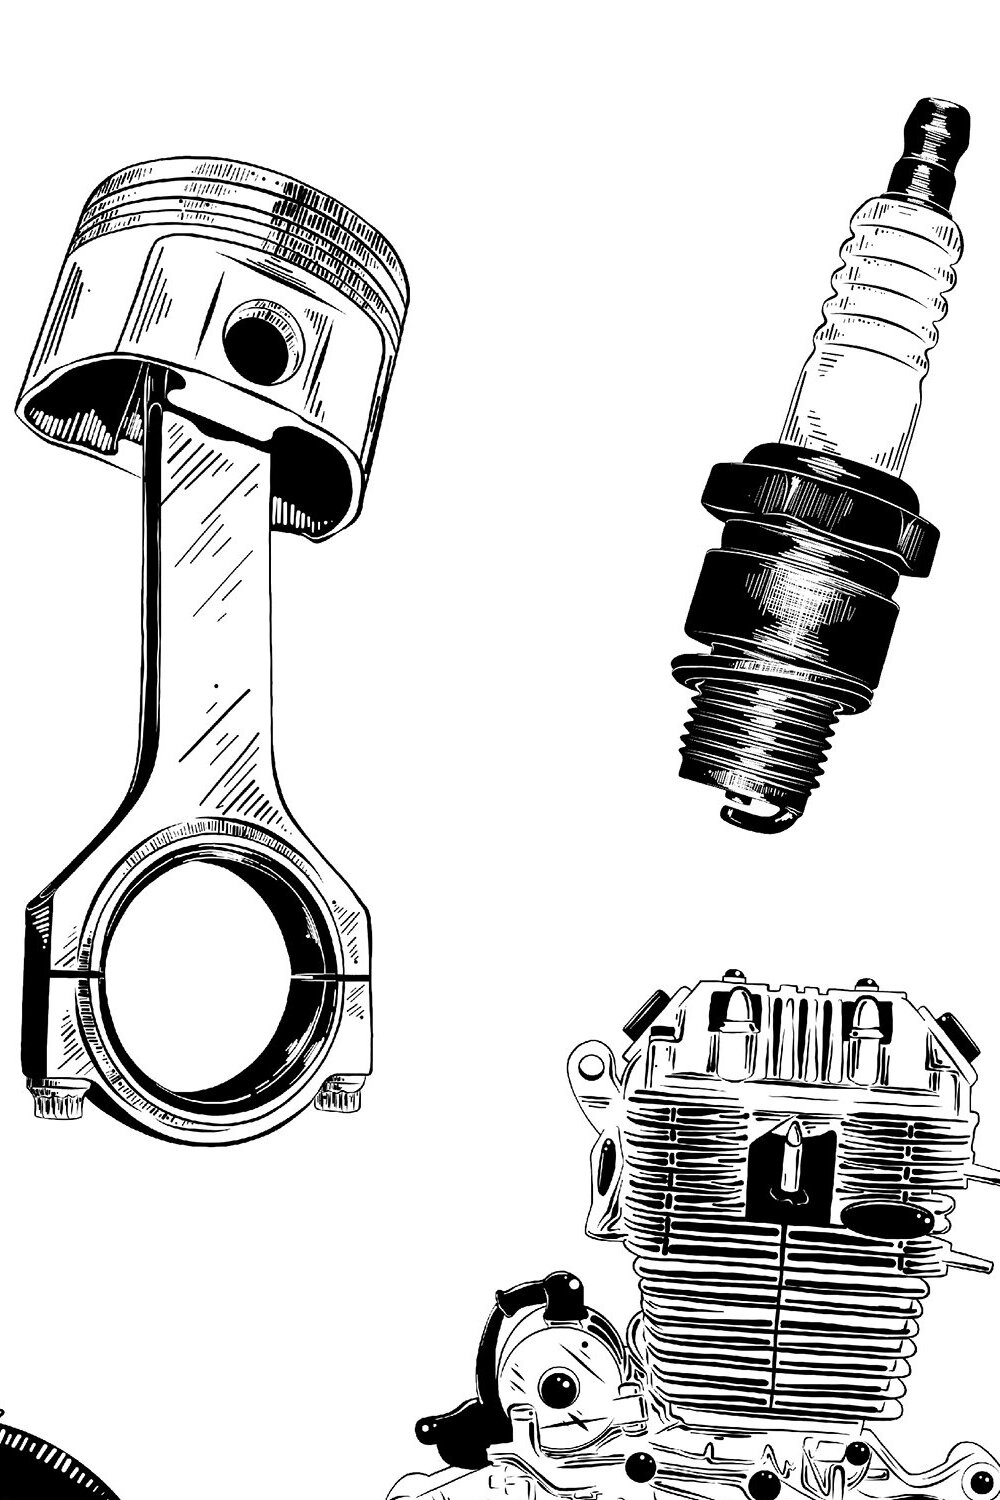 Black and white drawing of a motorcycle engine.